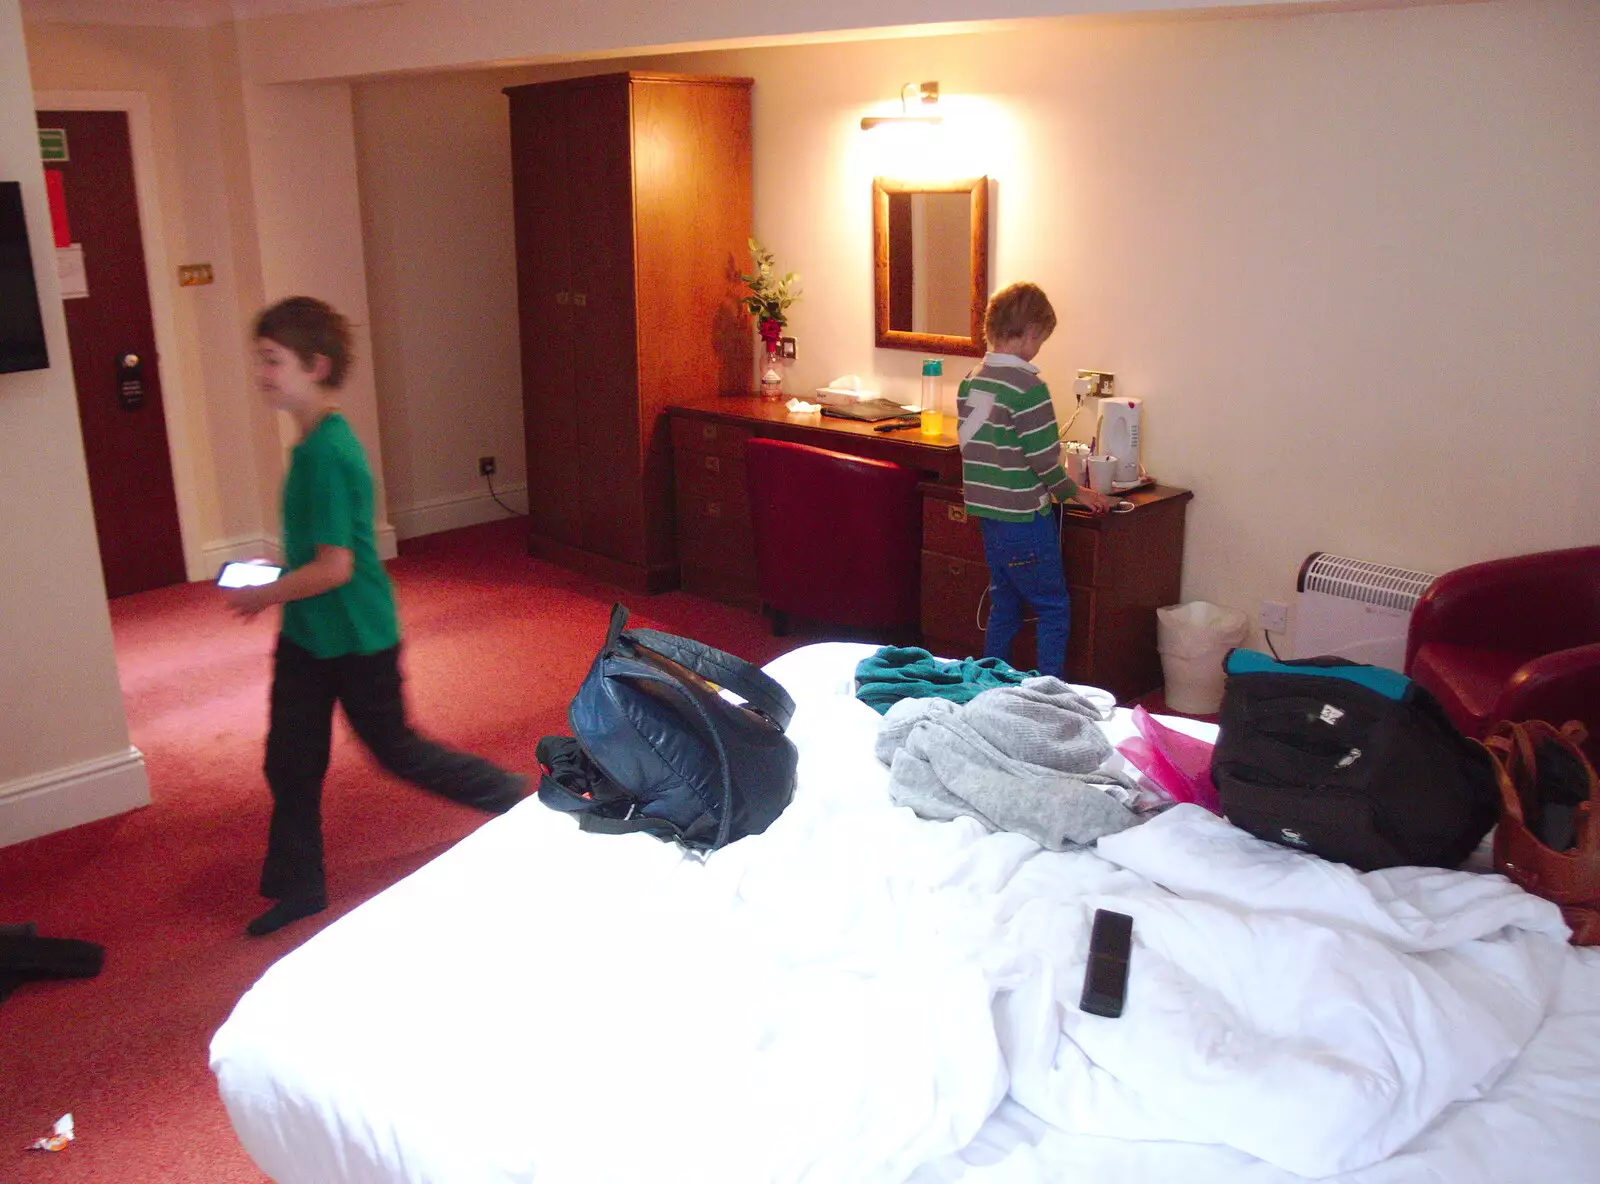 The boys in the hotel room, from The Summer Trip to Ireland, Monkstown, Co. Dublin, Ireland - 9th August 2019